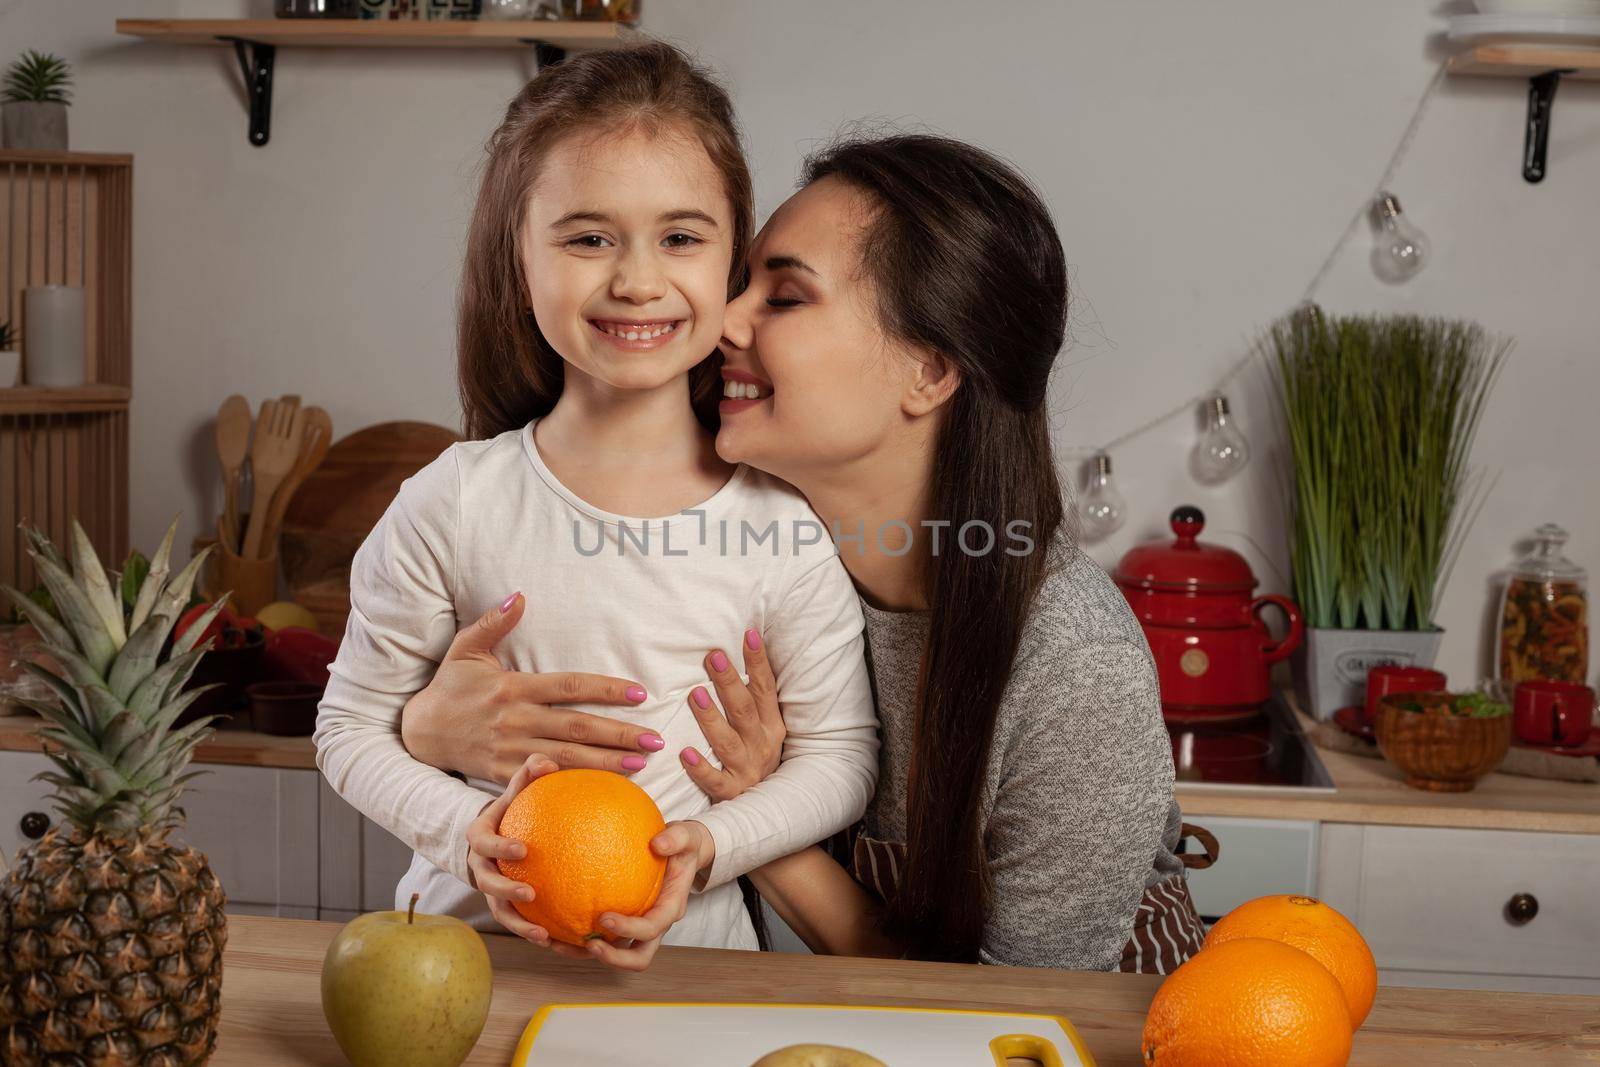 Happy loving family are cooking together. Lovely mommy and her little girl are doing a fruit cutting and hugging at the kitchen, against a white wall with shelves and bulbs on it. Homemade food and little helper.